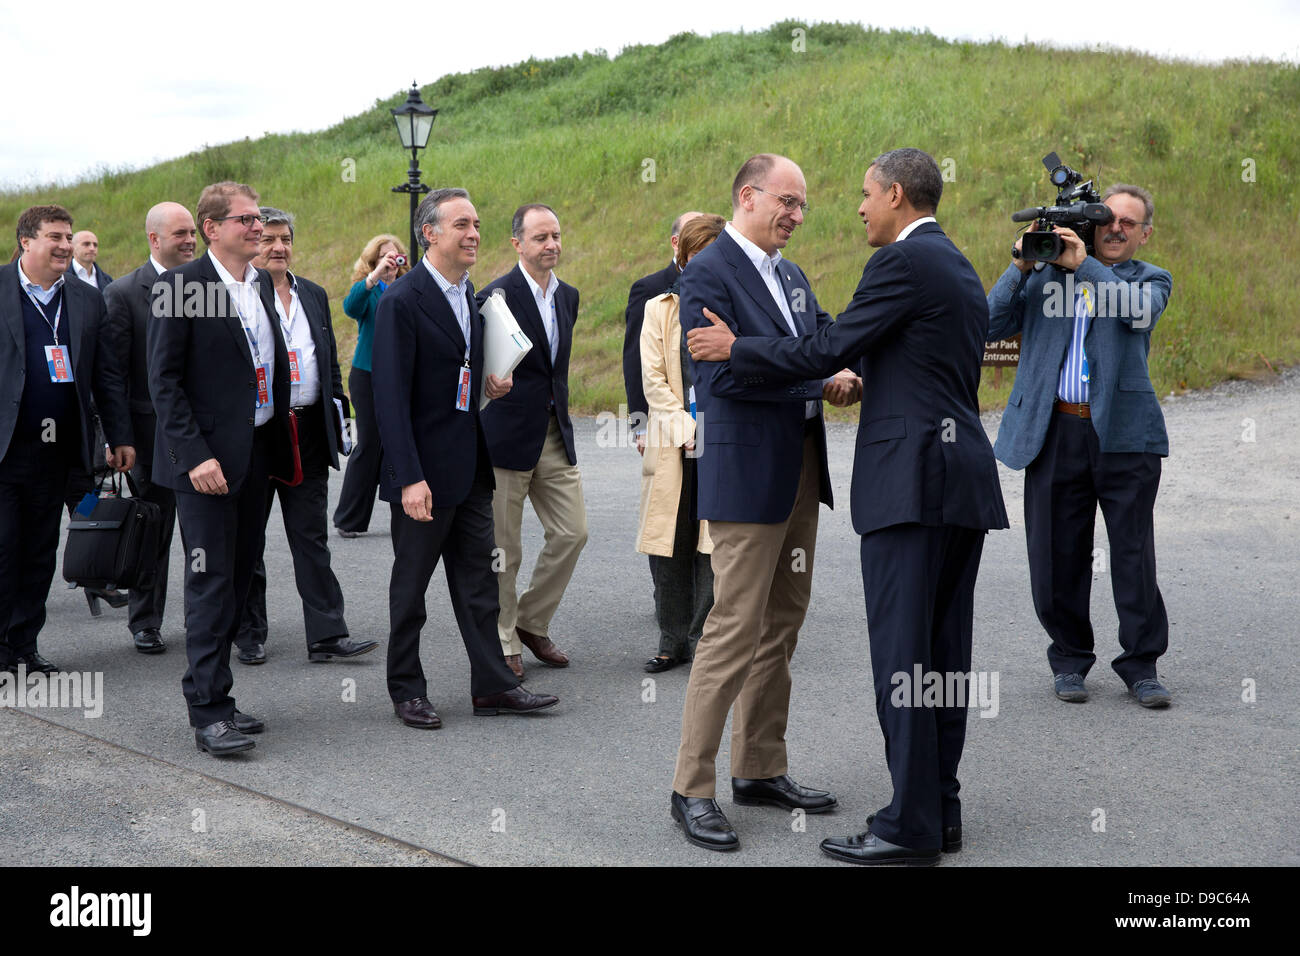 US President Barack Obama greets Italy Prime Minister Enrico Letta at the G8 Summit June 17, 2013 in Lough Erne, Northern Ireland. Stock Photo